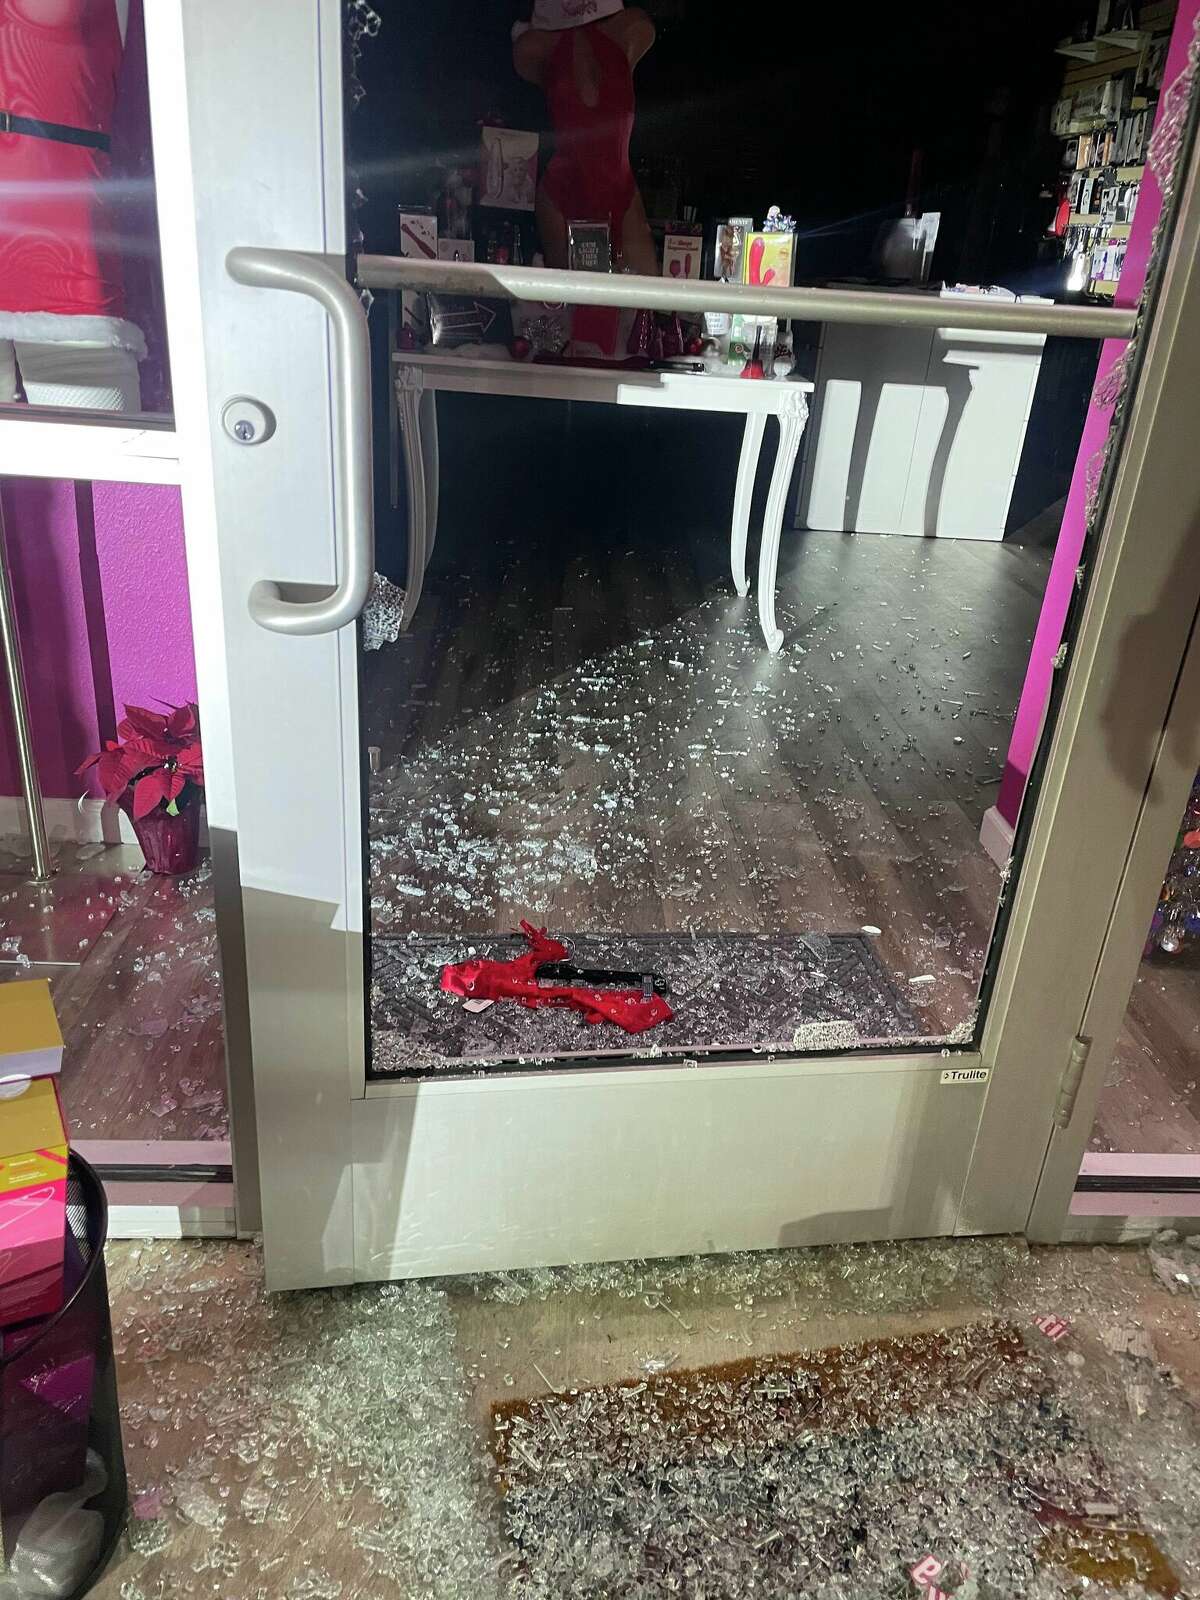 A San Antonio sex boutique is heartbroken after experiencing a huge loss from a break-in on Wednesday, December 7.